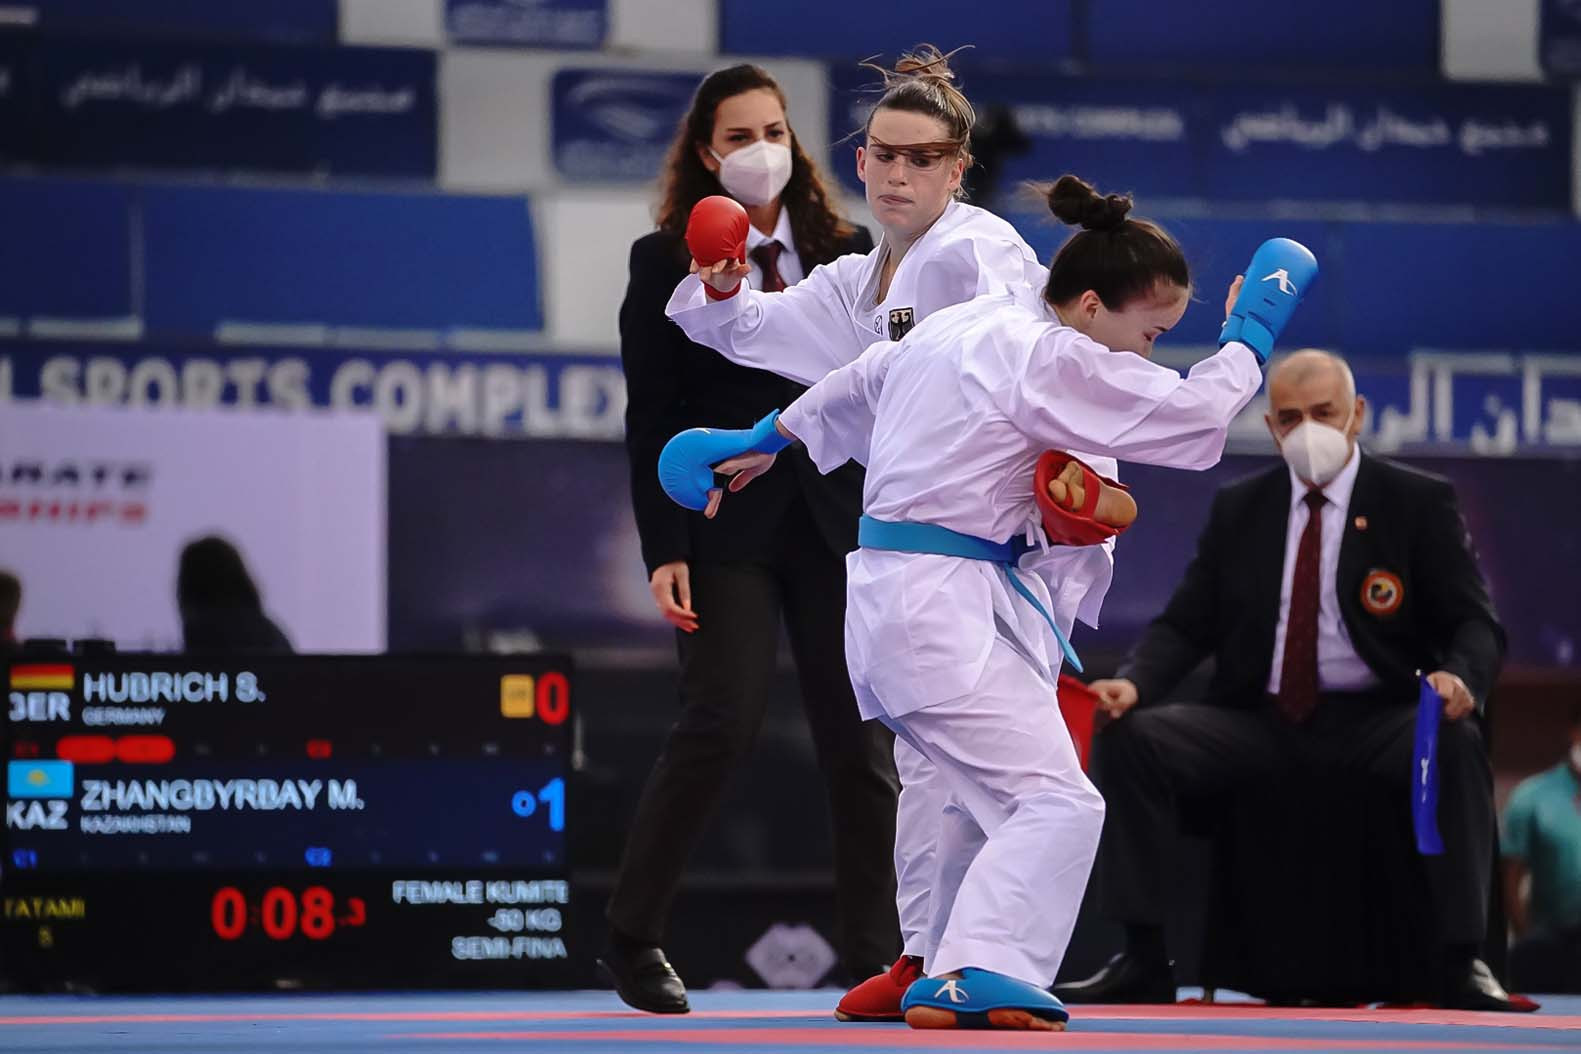 Germany's Shara Hubrich, in red, won her semi-final in dramatic fashion ©WKF